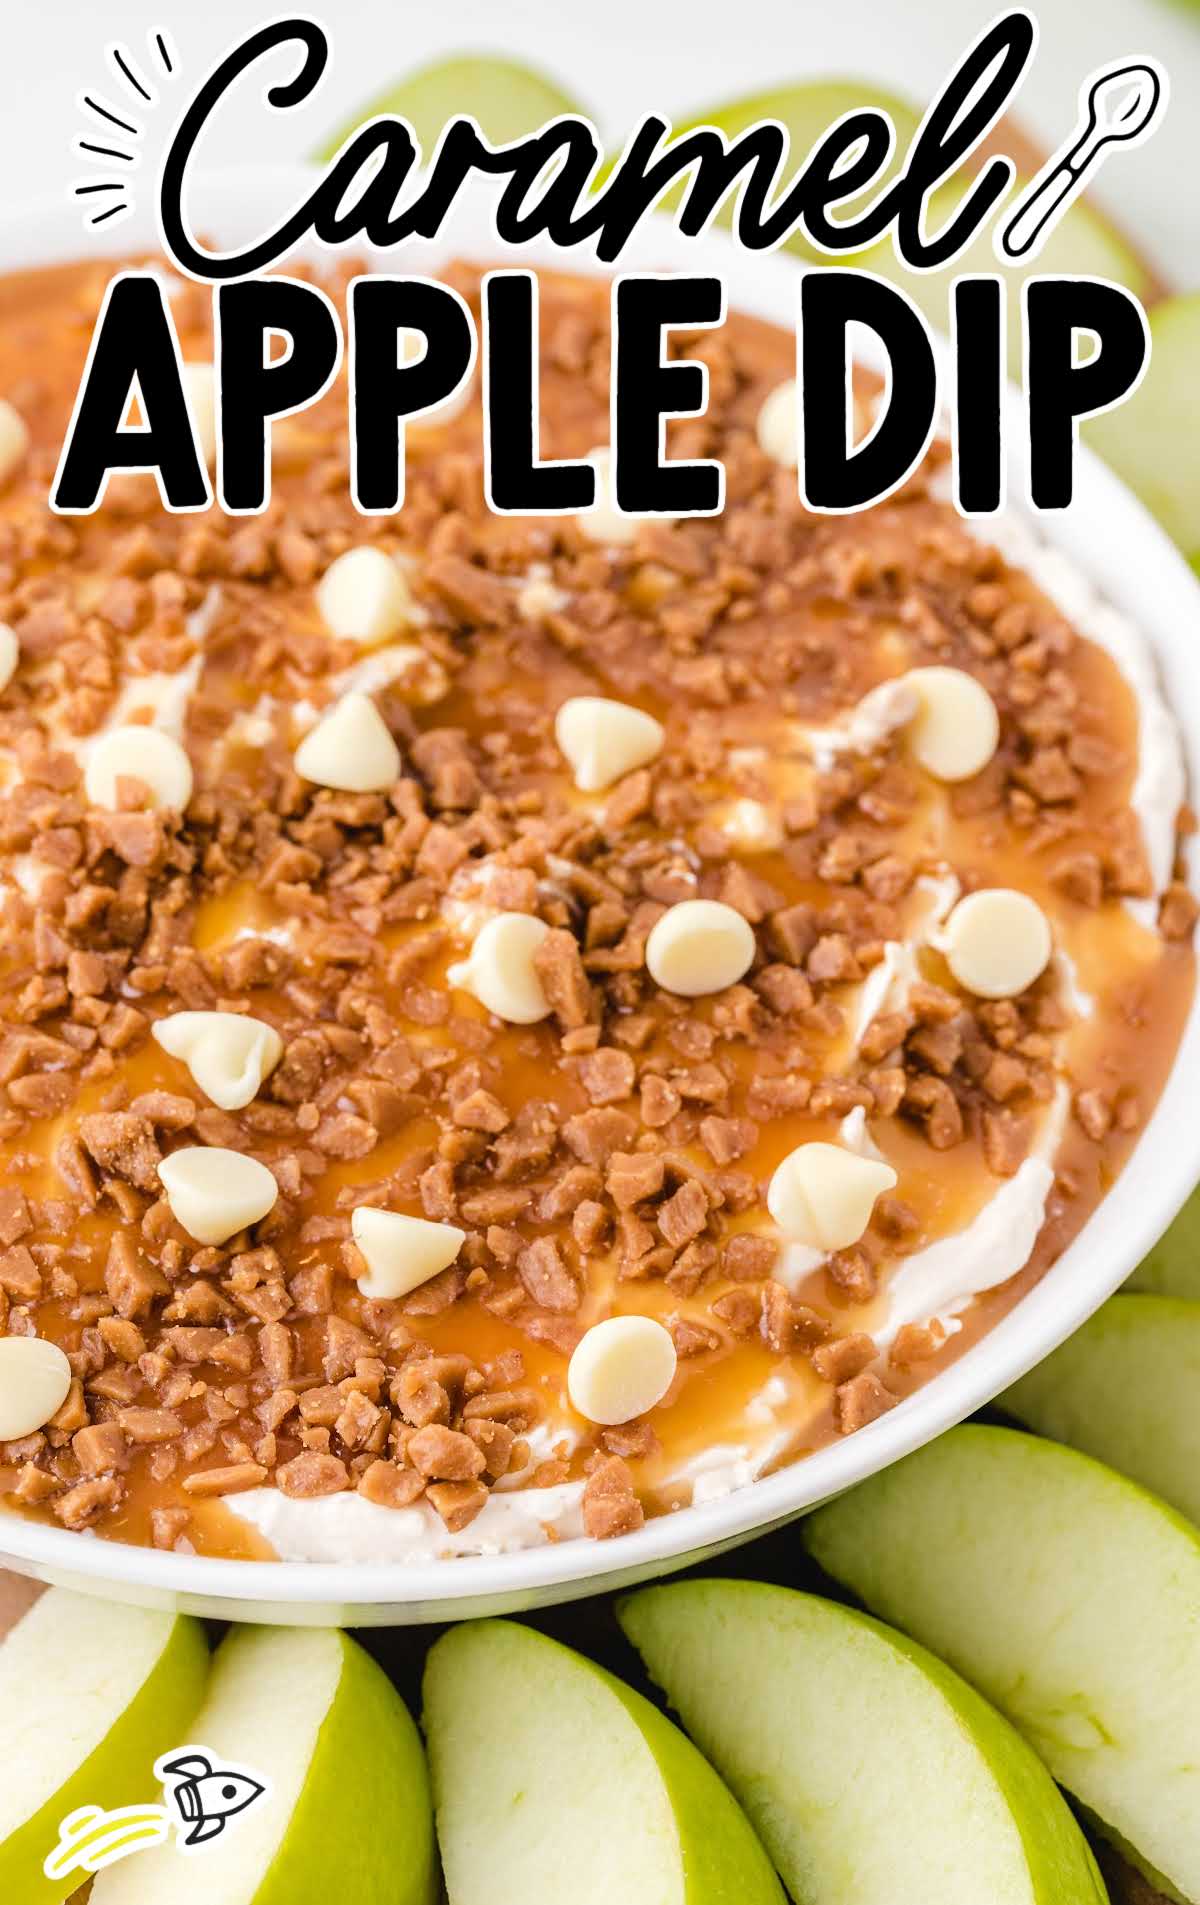 close up shot of a bowl of caramel apple dip topped with caramel, toffee, and white chocolate with sliced apples on the side for dipping